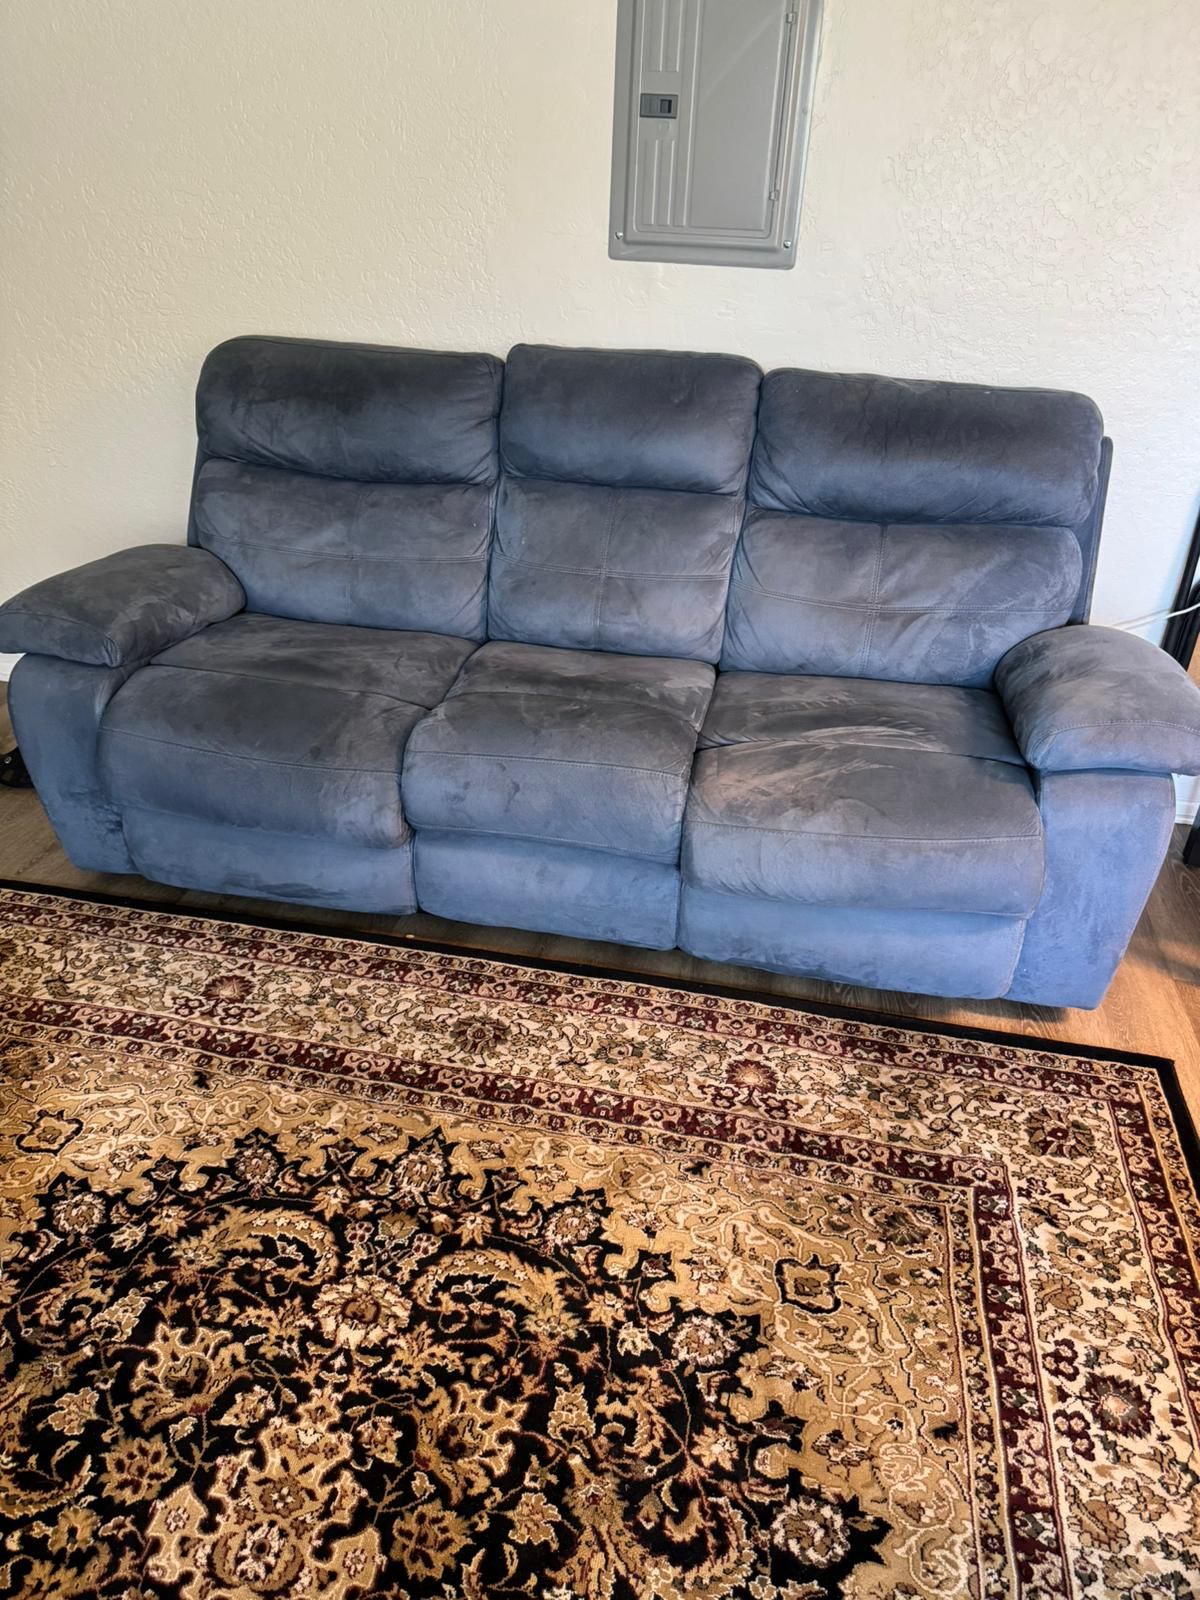 Couch&loveseat